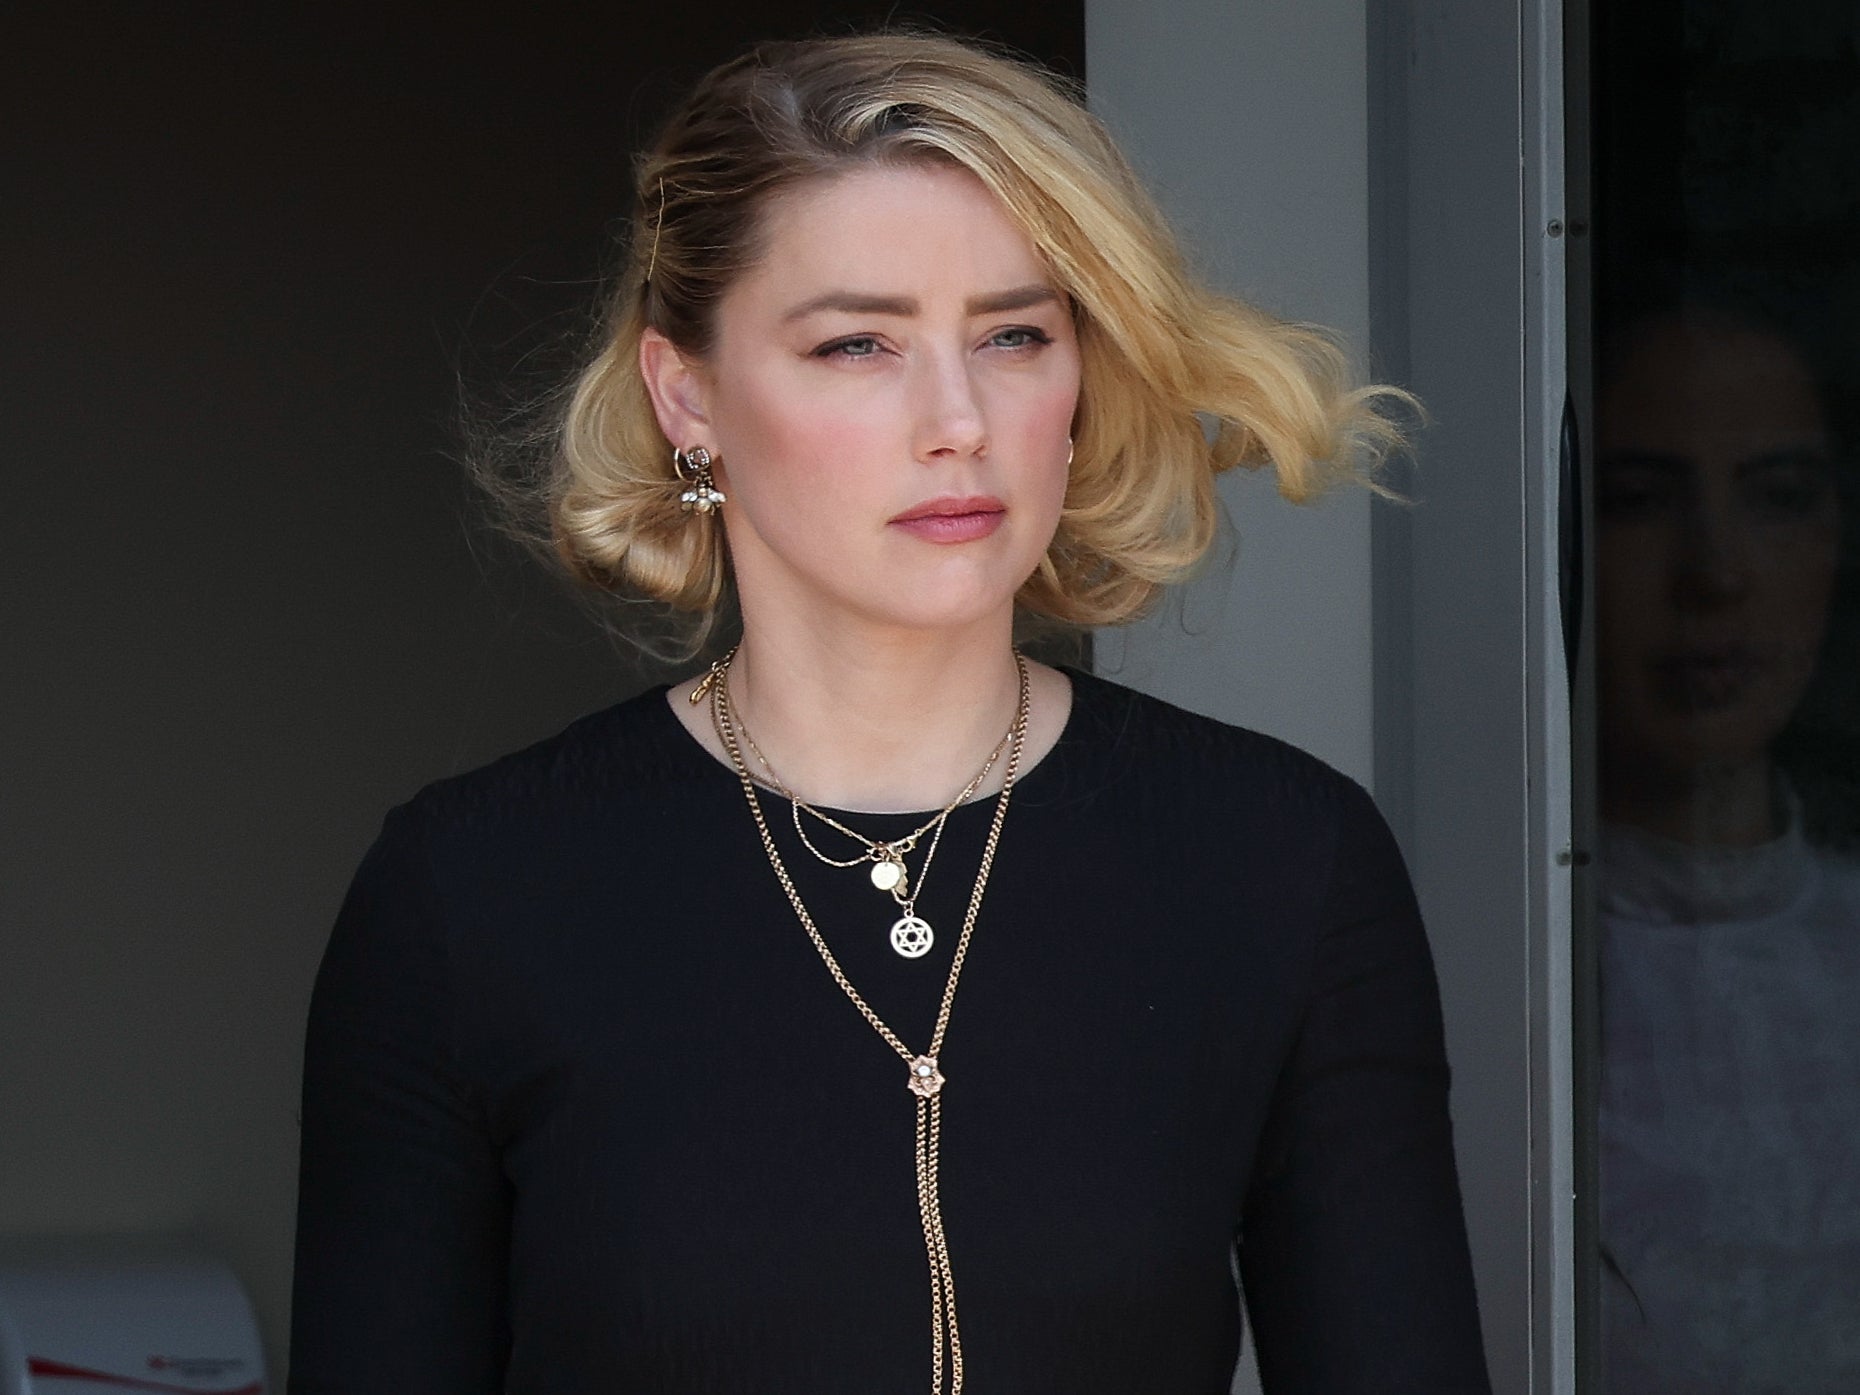 Amber Heard departs the Fairfax County Courthouse on 1 June 2022 in Fairfax, Virginia